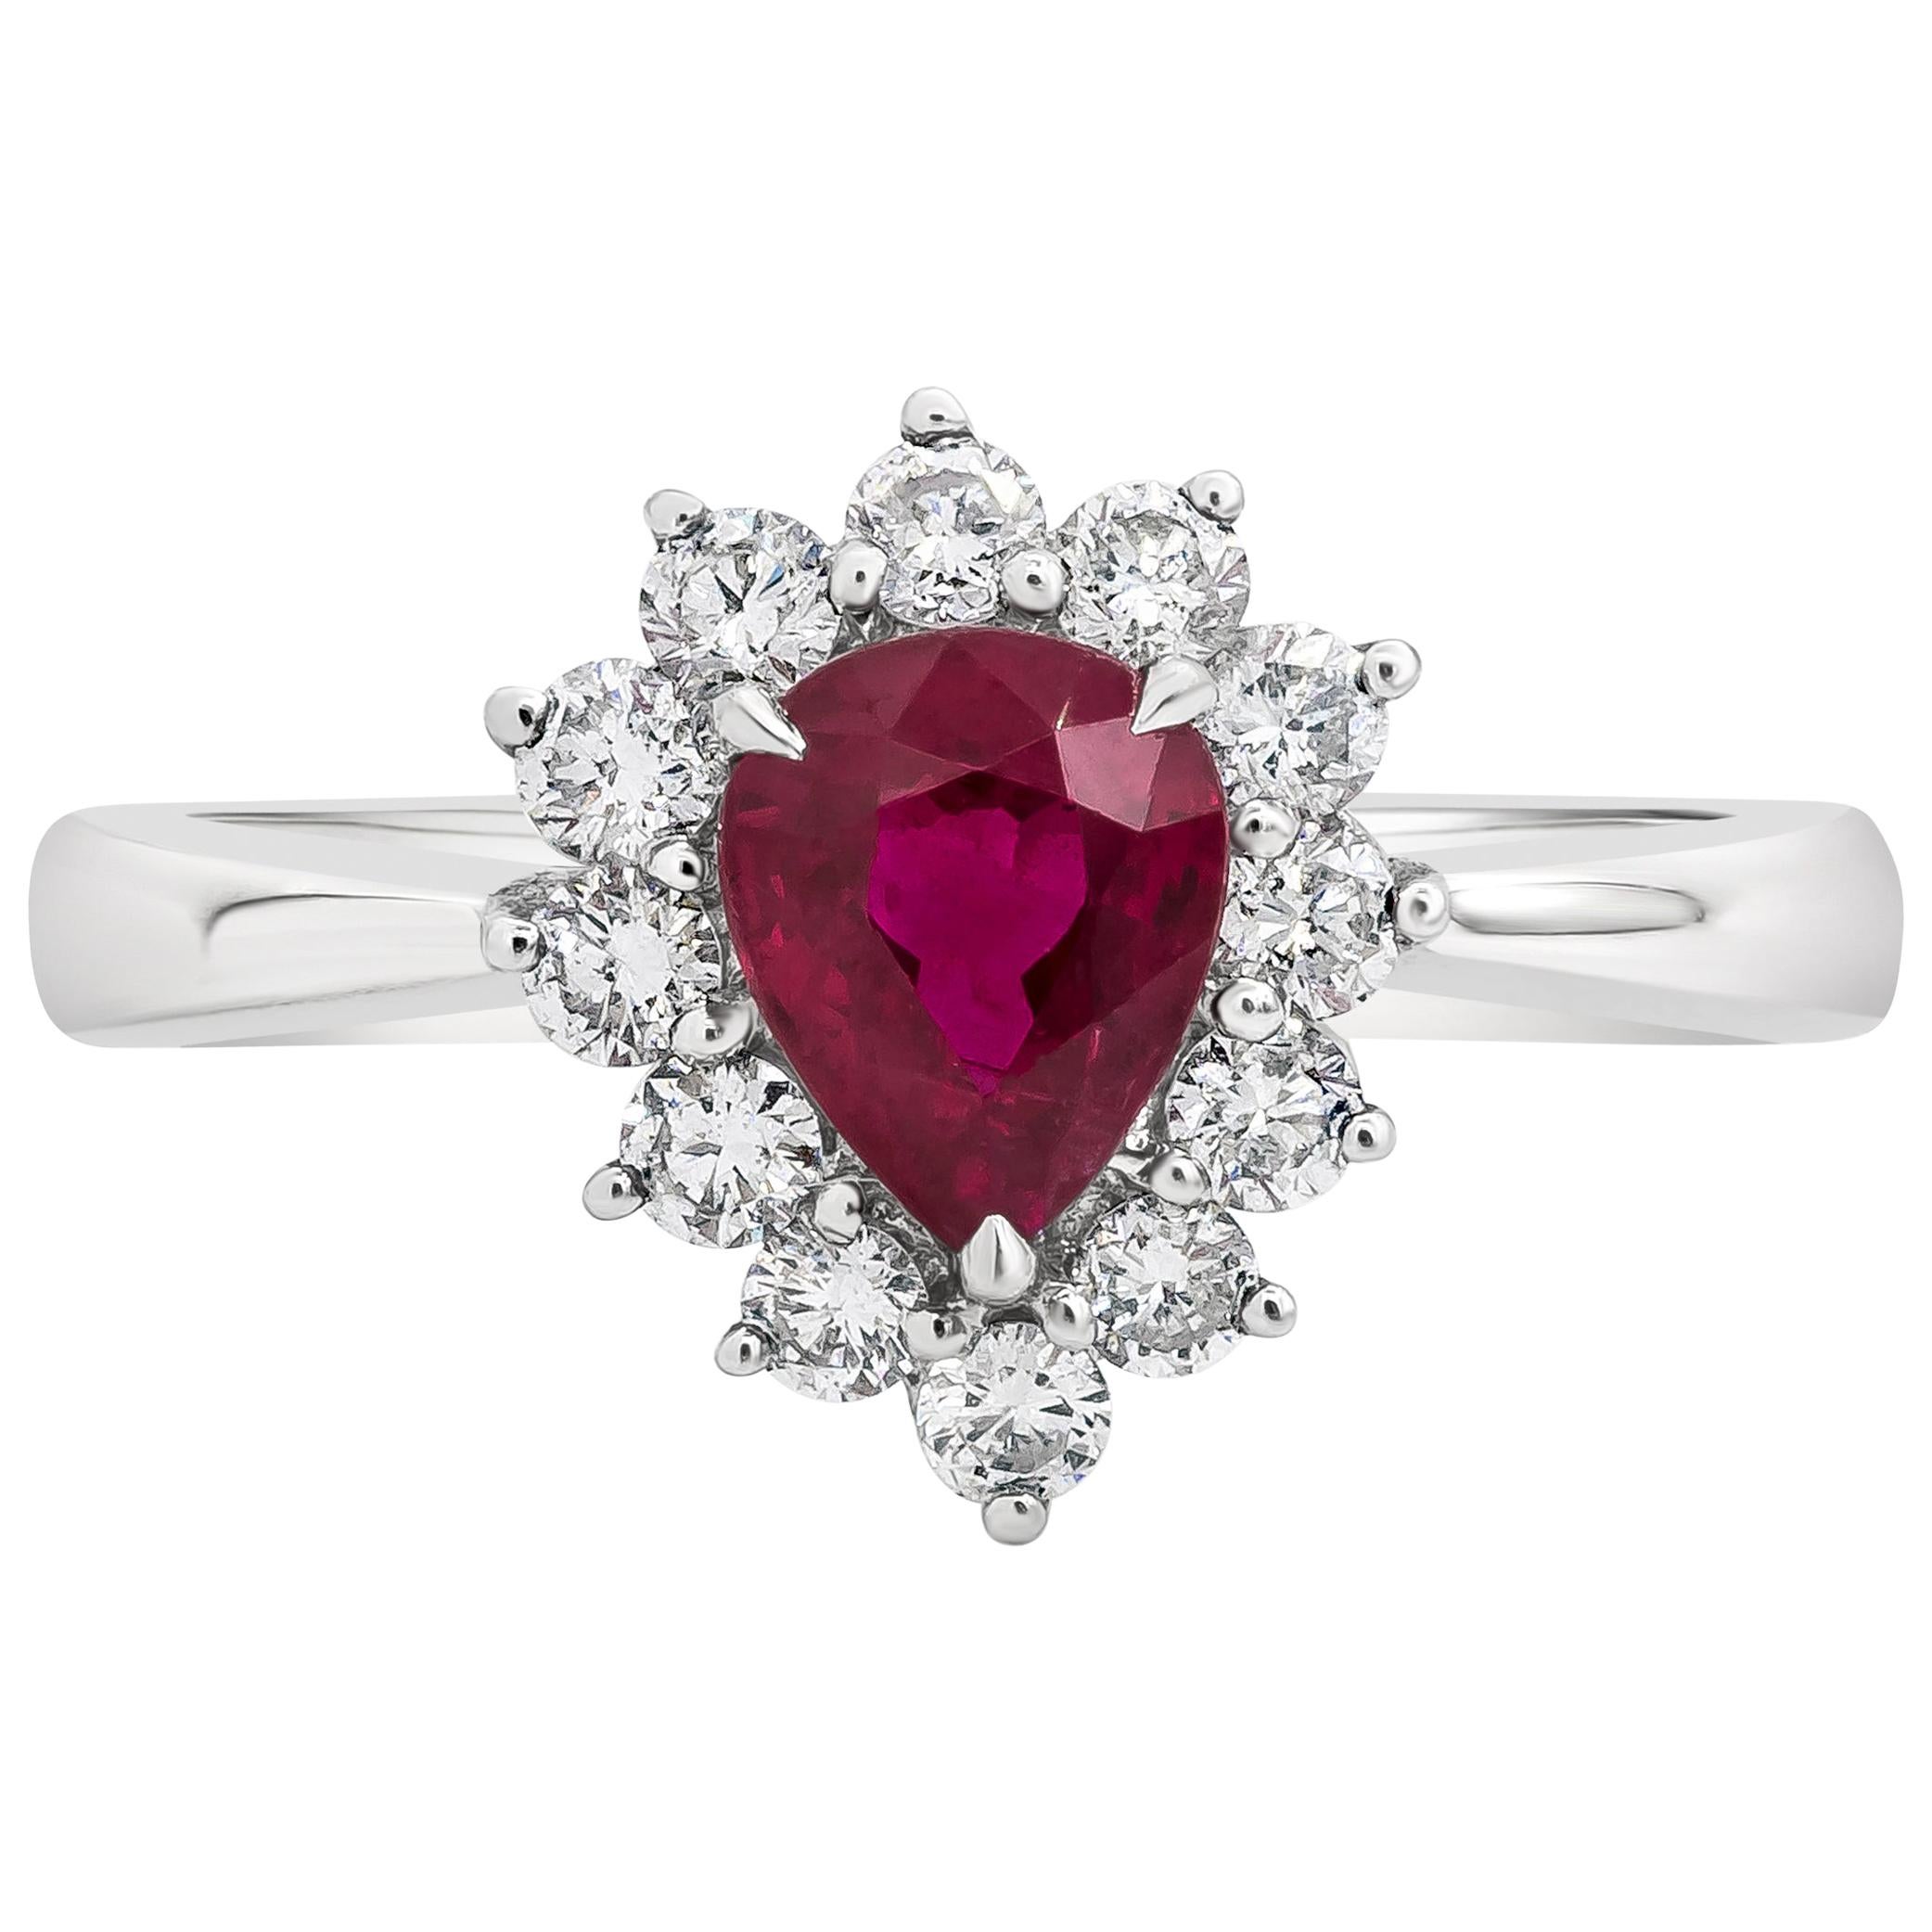 Roman Malakov 1.11 Carats Pear Shape Ruby and Diamond Halo Engagement Ring For Sale